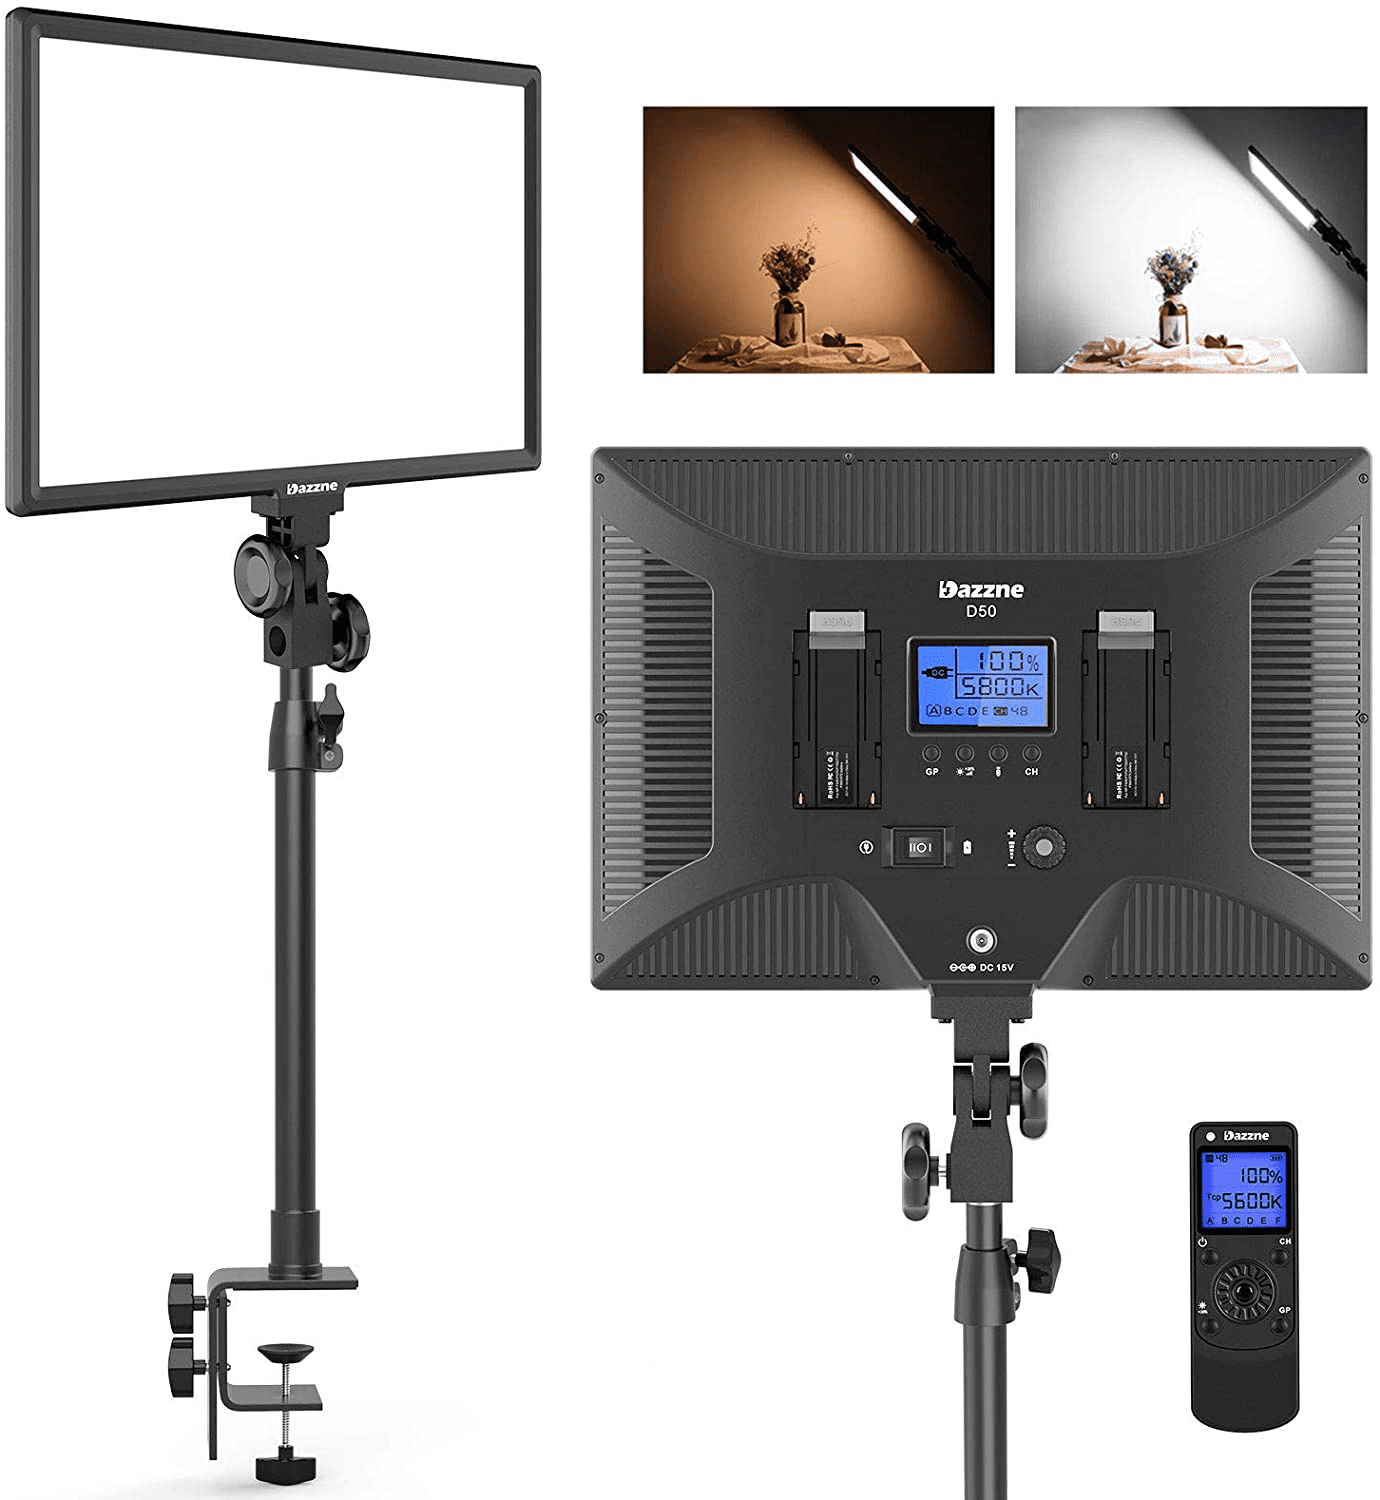 Dazzne D50 Desk Mount Video Light with C-Clamp 15.4 Inches 45W 3000K-8000K 3600LM Dimmable 0-100% for Video Conference Tiktok Live/Game Streaming LED Studio Photography Light with Wireless Remote